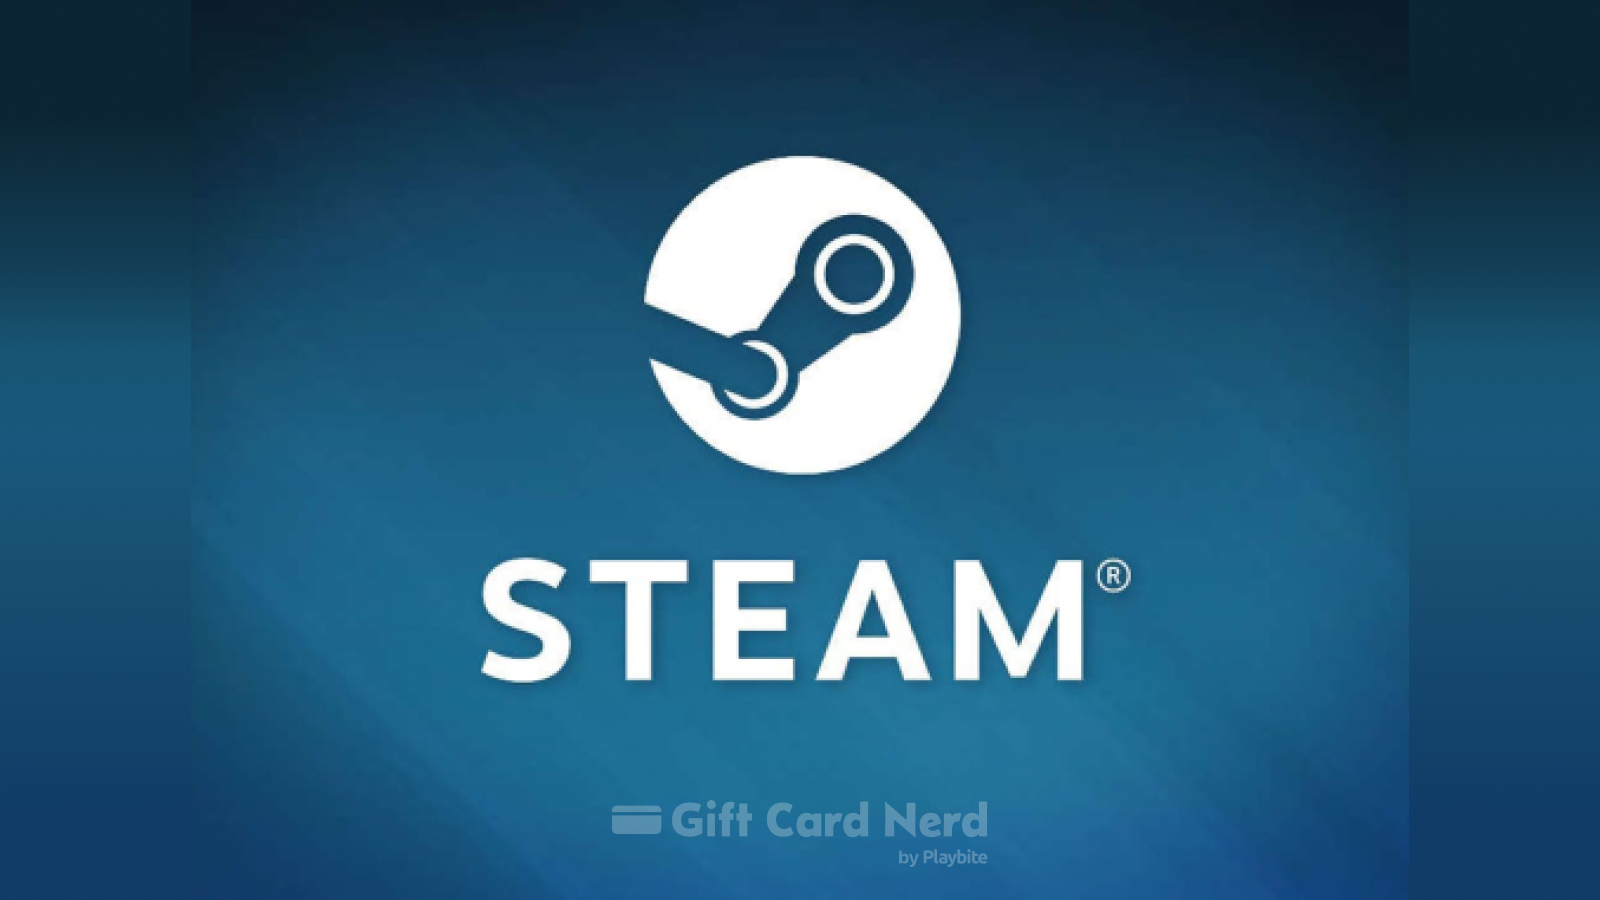 How to Check Your Steam Gift Card Balance